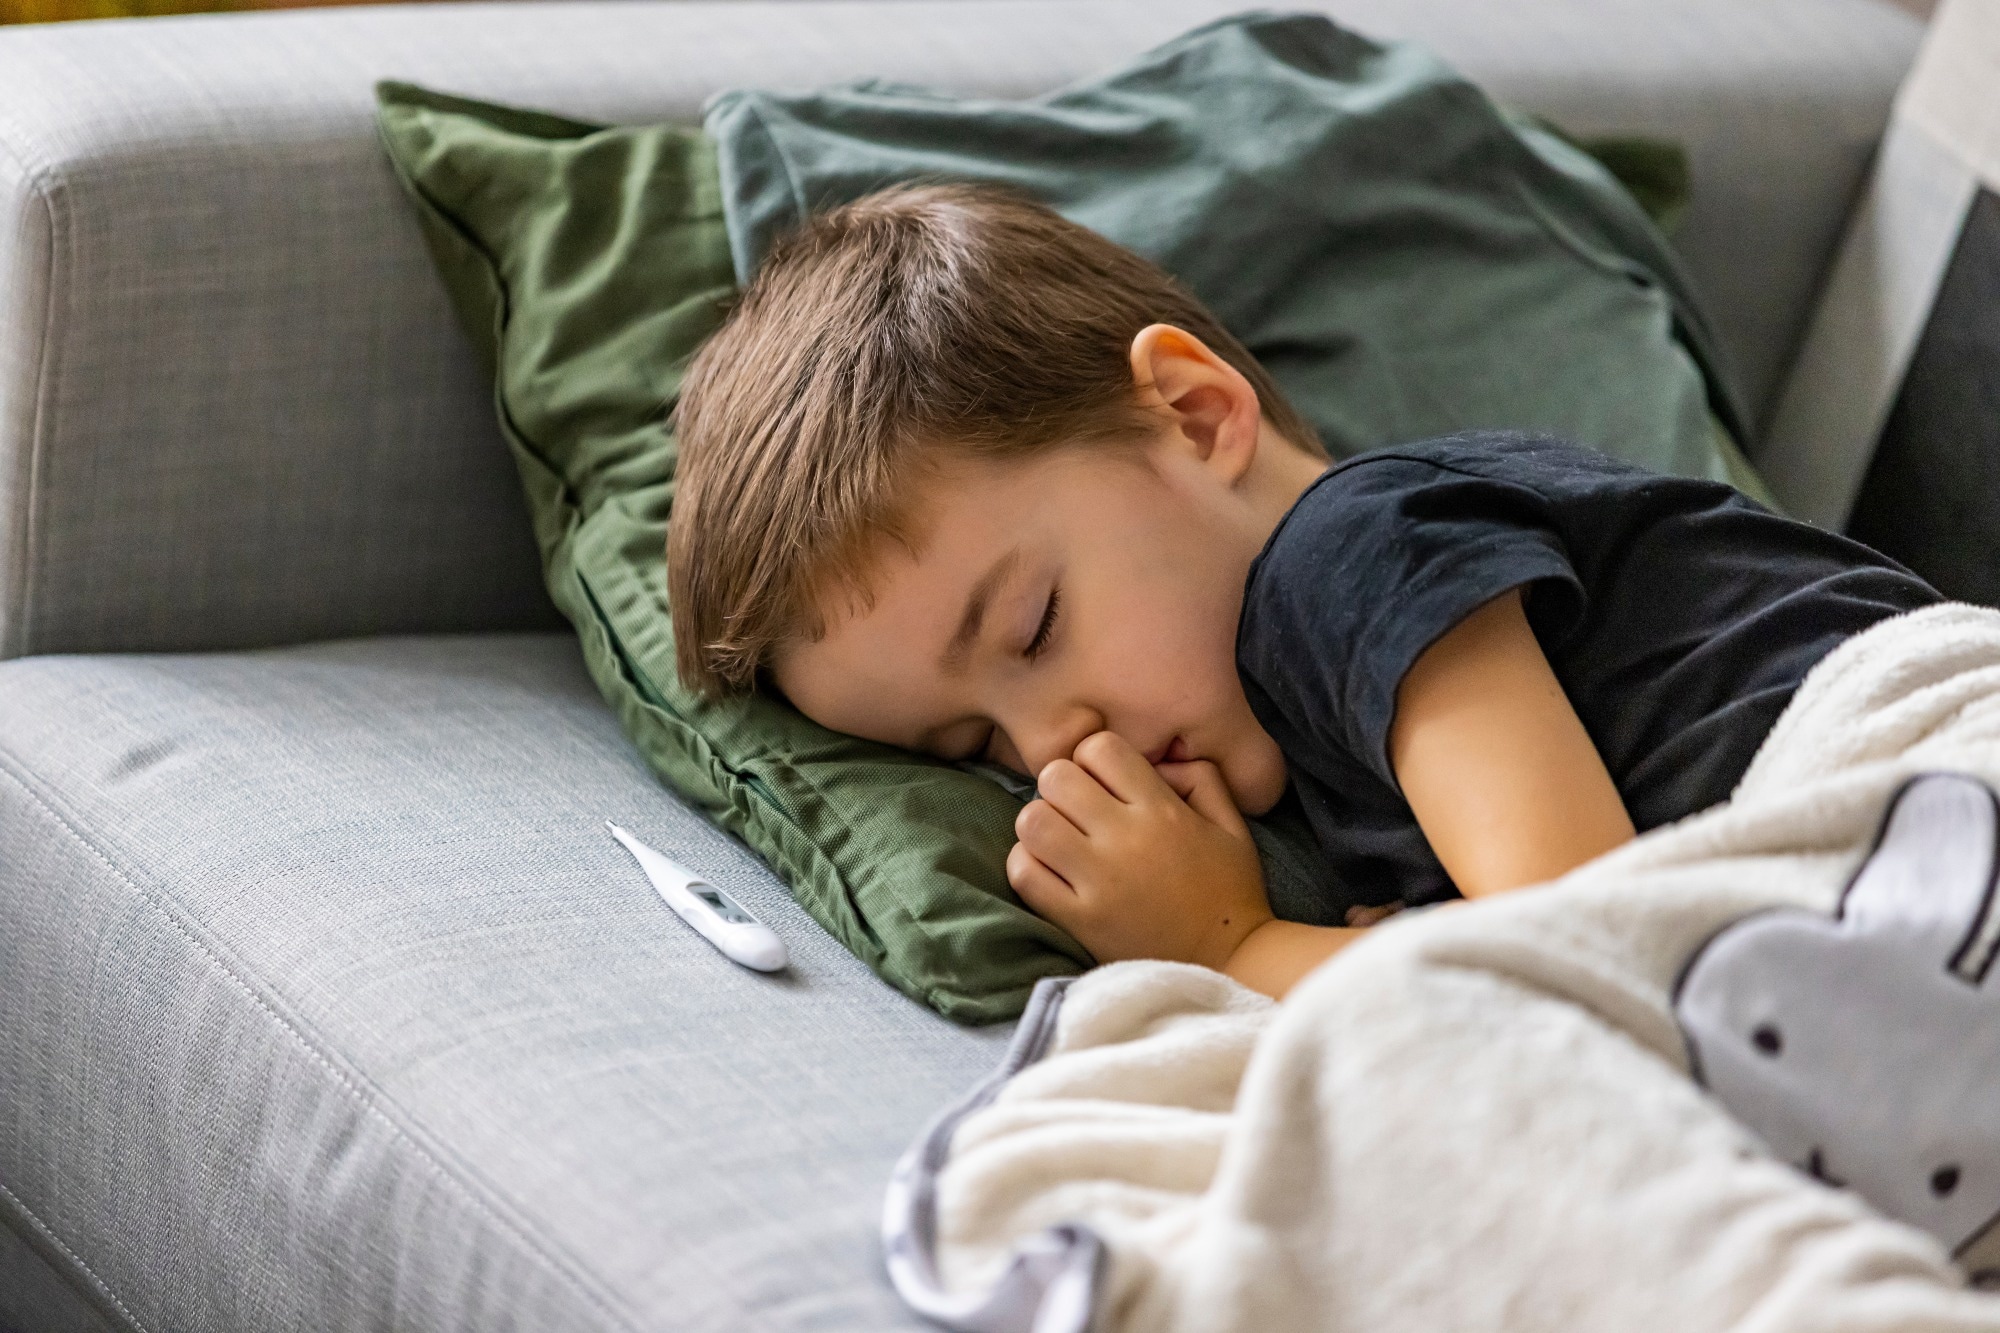 Study: Trends in Outpatient Influenza Antiviral Use Among Children and Adolescents in the United States. Image Credit: Dragana Gordic / Shutterstock